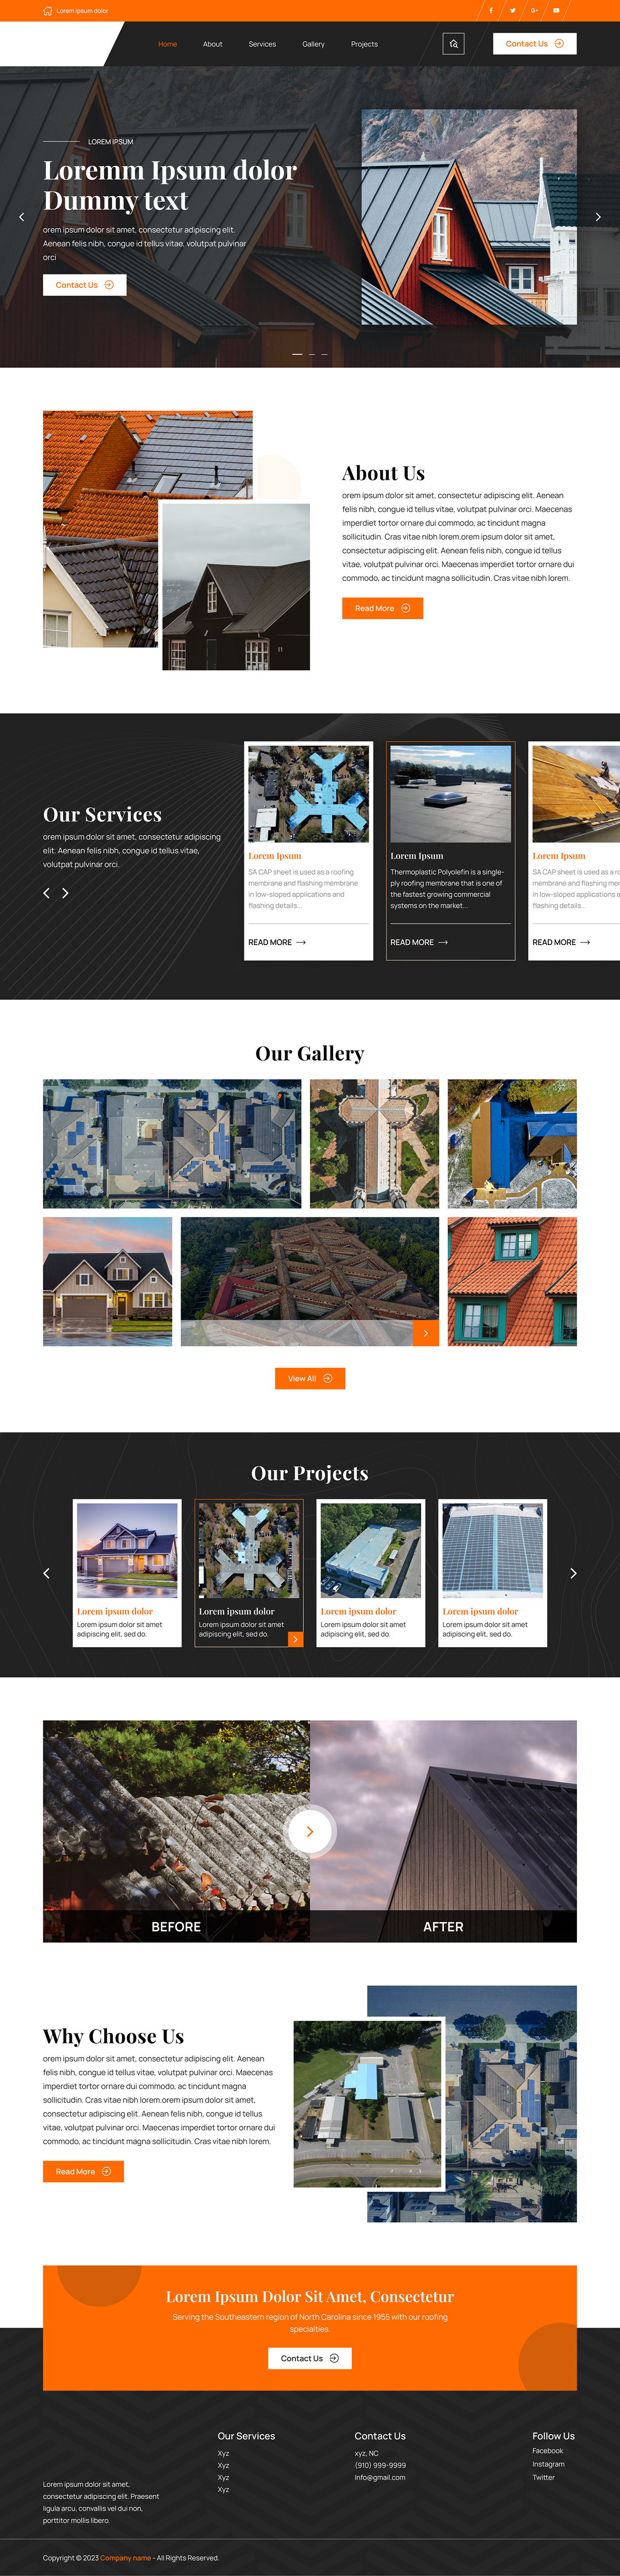 homepage design Homepage layout roofing roofing company roofing contractor Roofing Contractors ui design UI/UX web layout Website Design